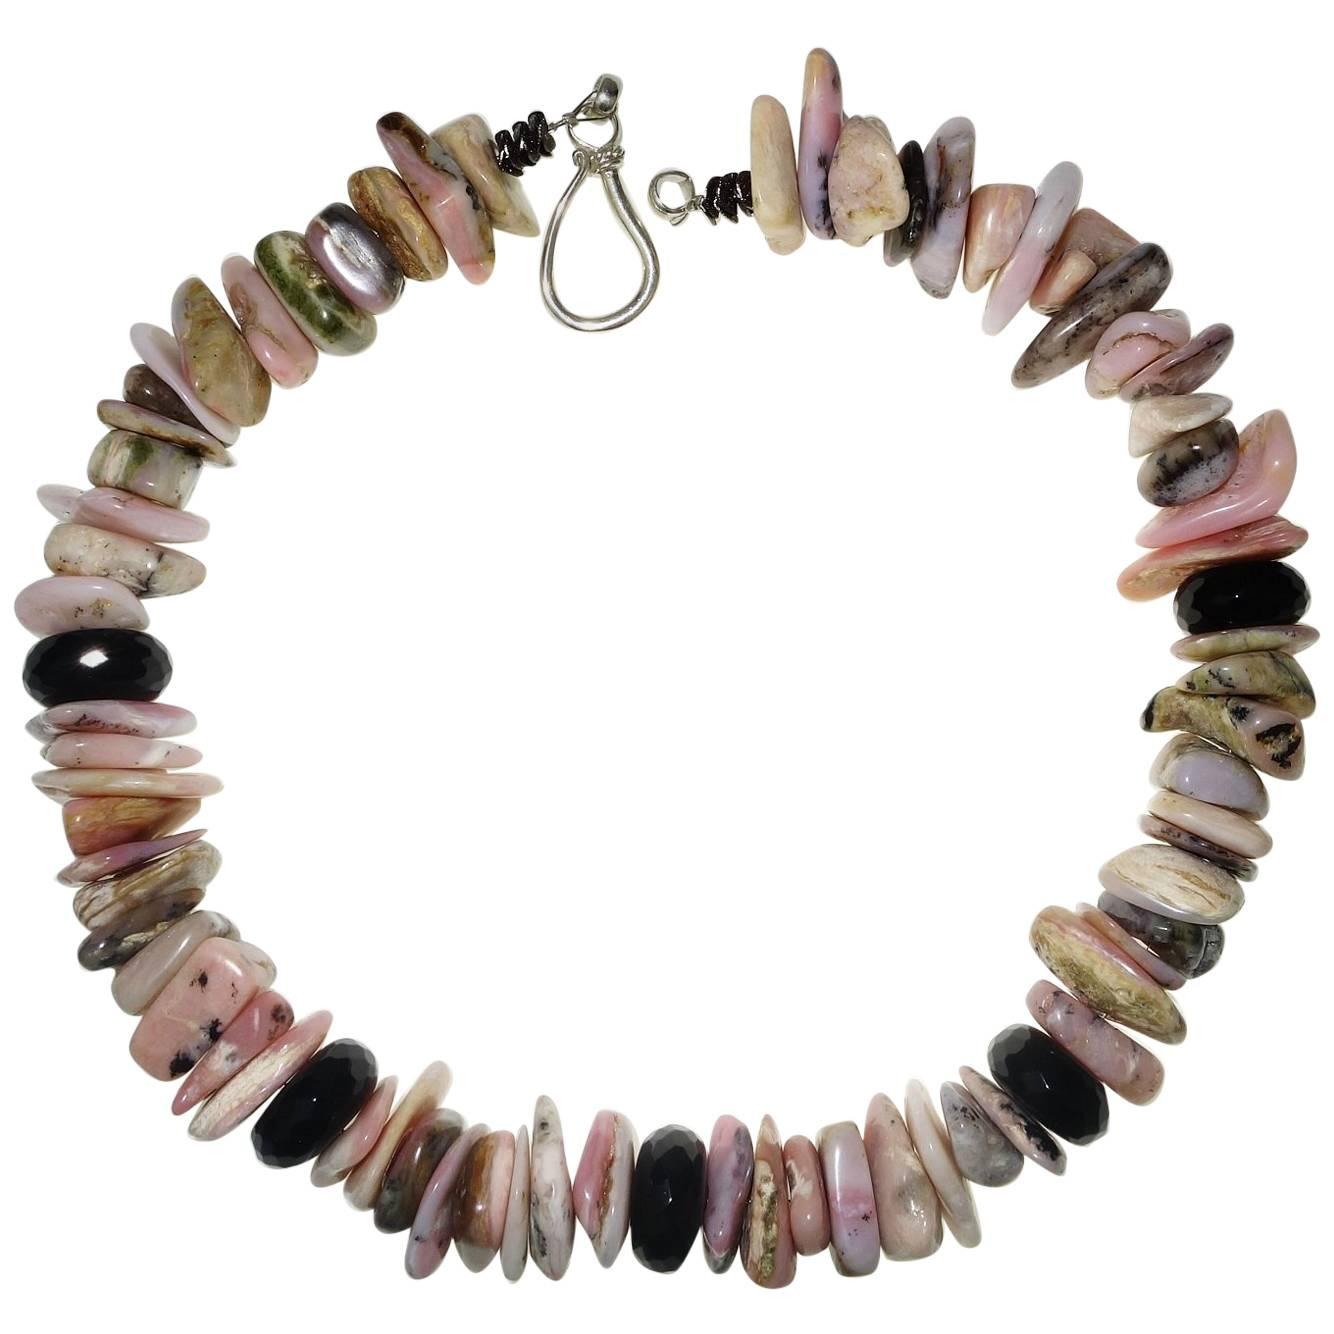 Necklace of Chunky Slices of Pink Peruvian Opal Accented with Black Onyx Rondels